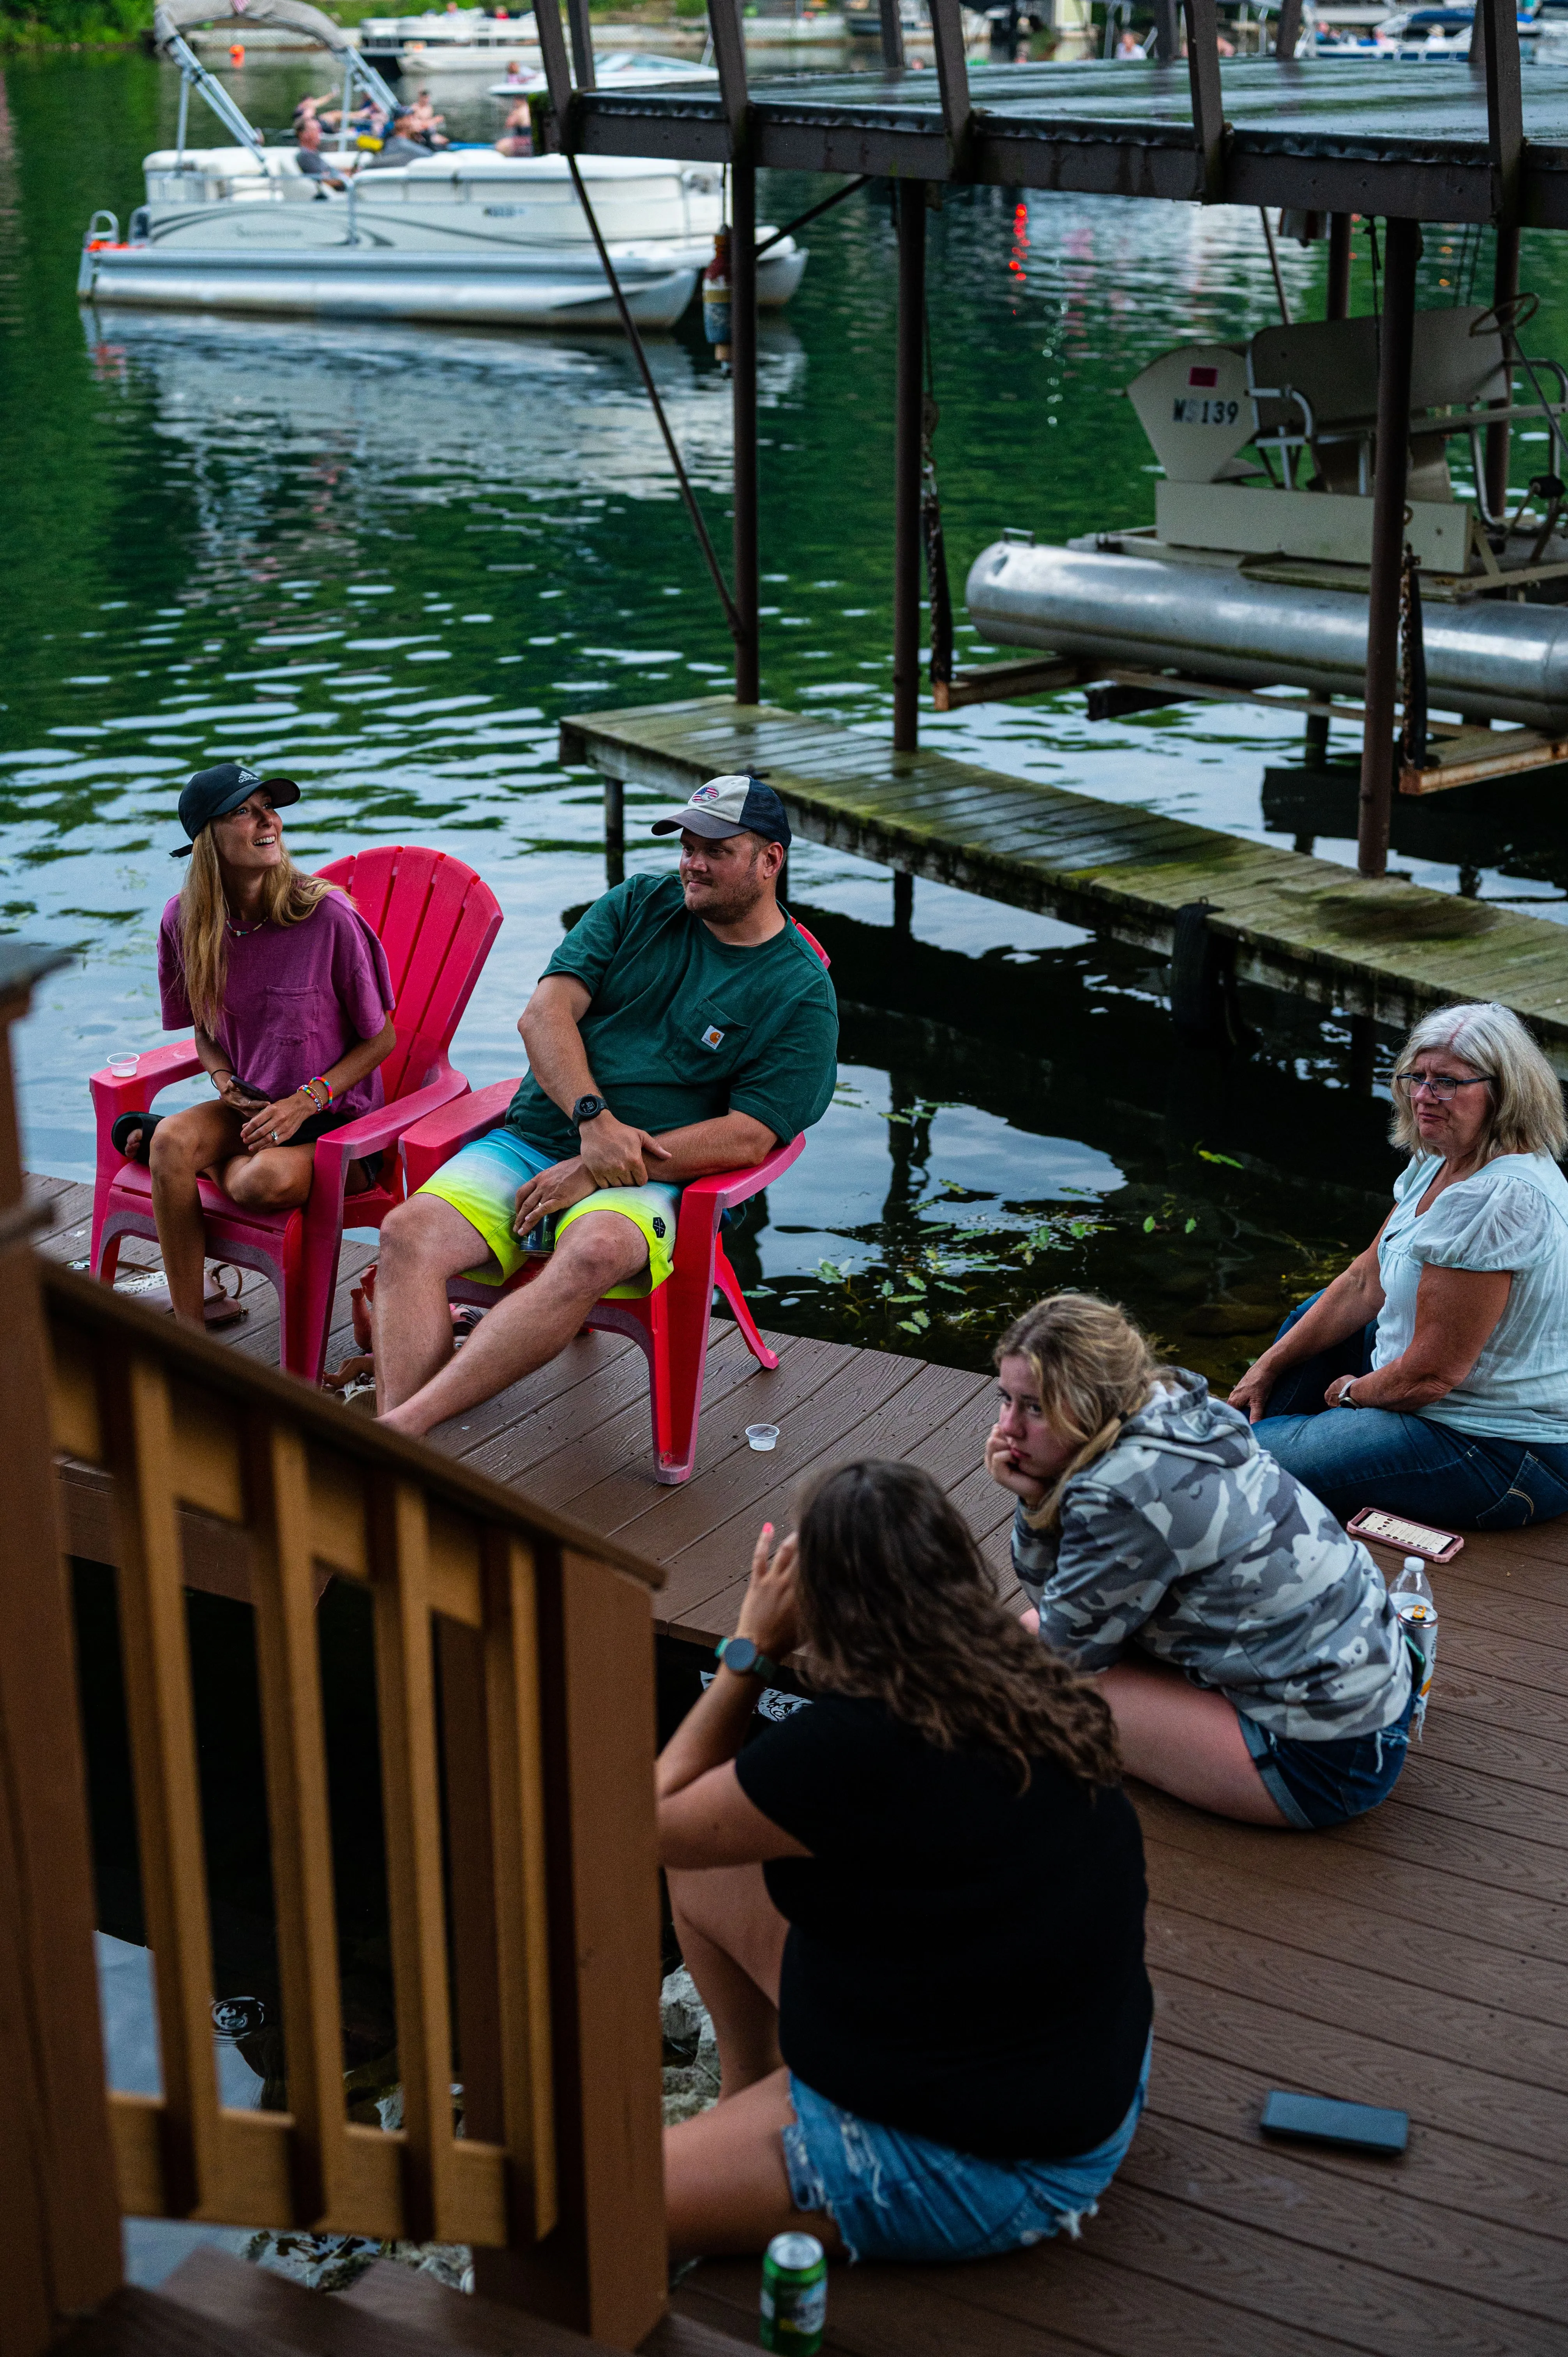 Group of people sitting and chatting on a lakeside deck with boats docked in the background